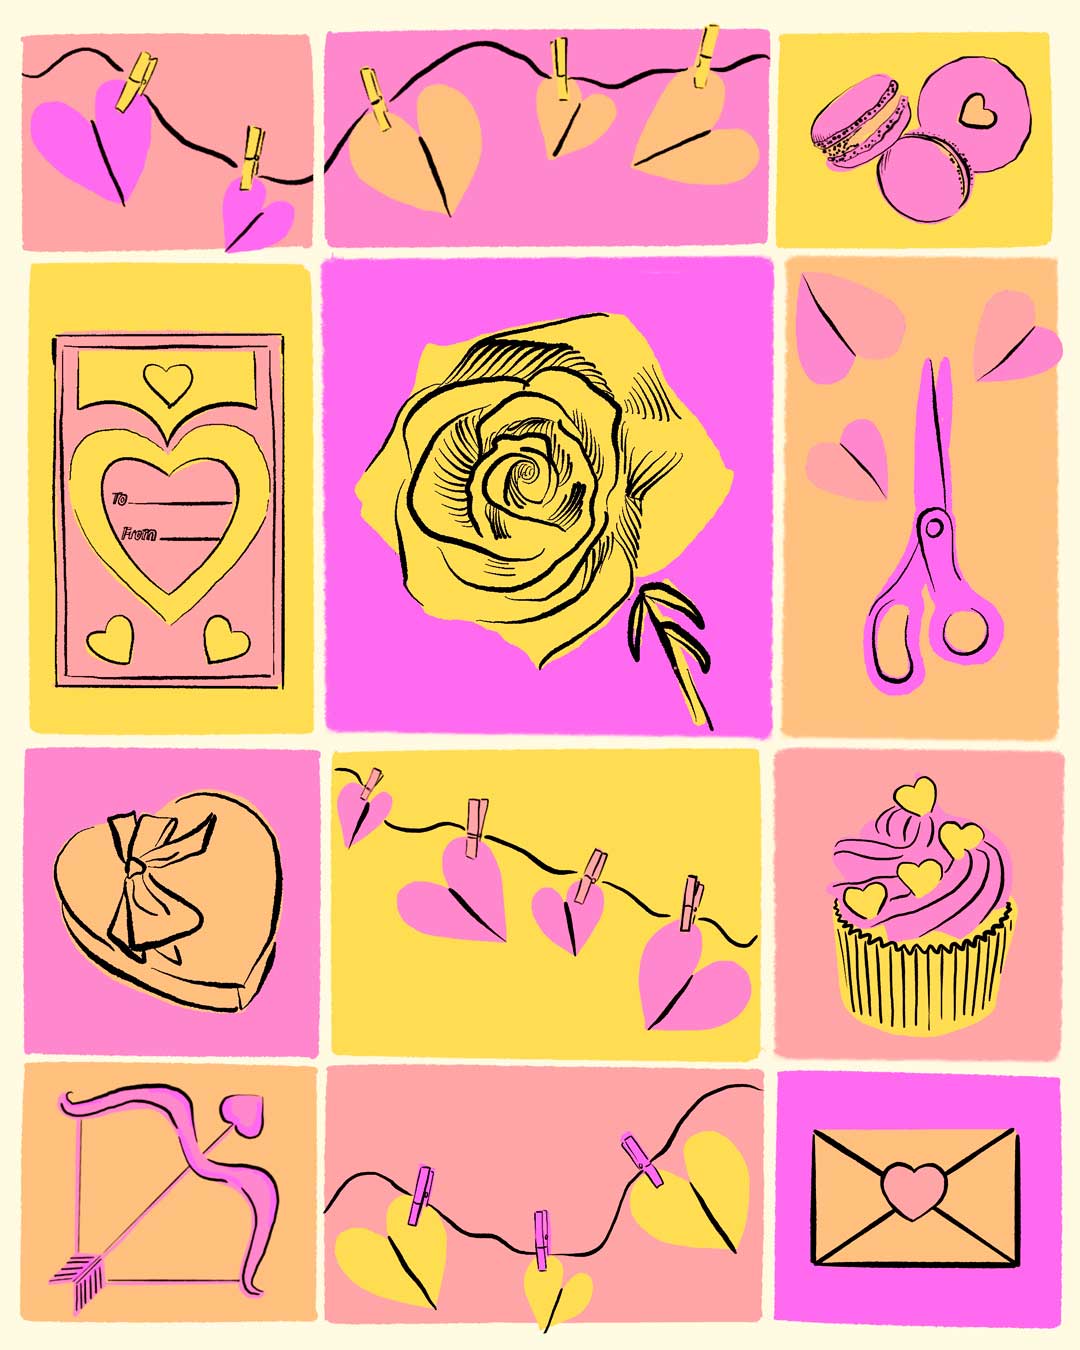 Illustrated image of pink, yellow, and peach colored Valentine's Day decor and treats such as a chocolate box, scissors cutting out paper hearts, a rose, and valentines cards